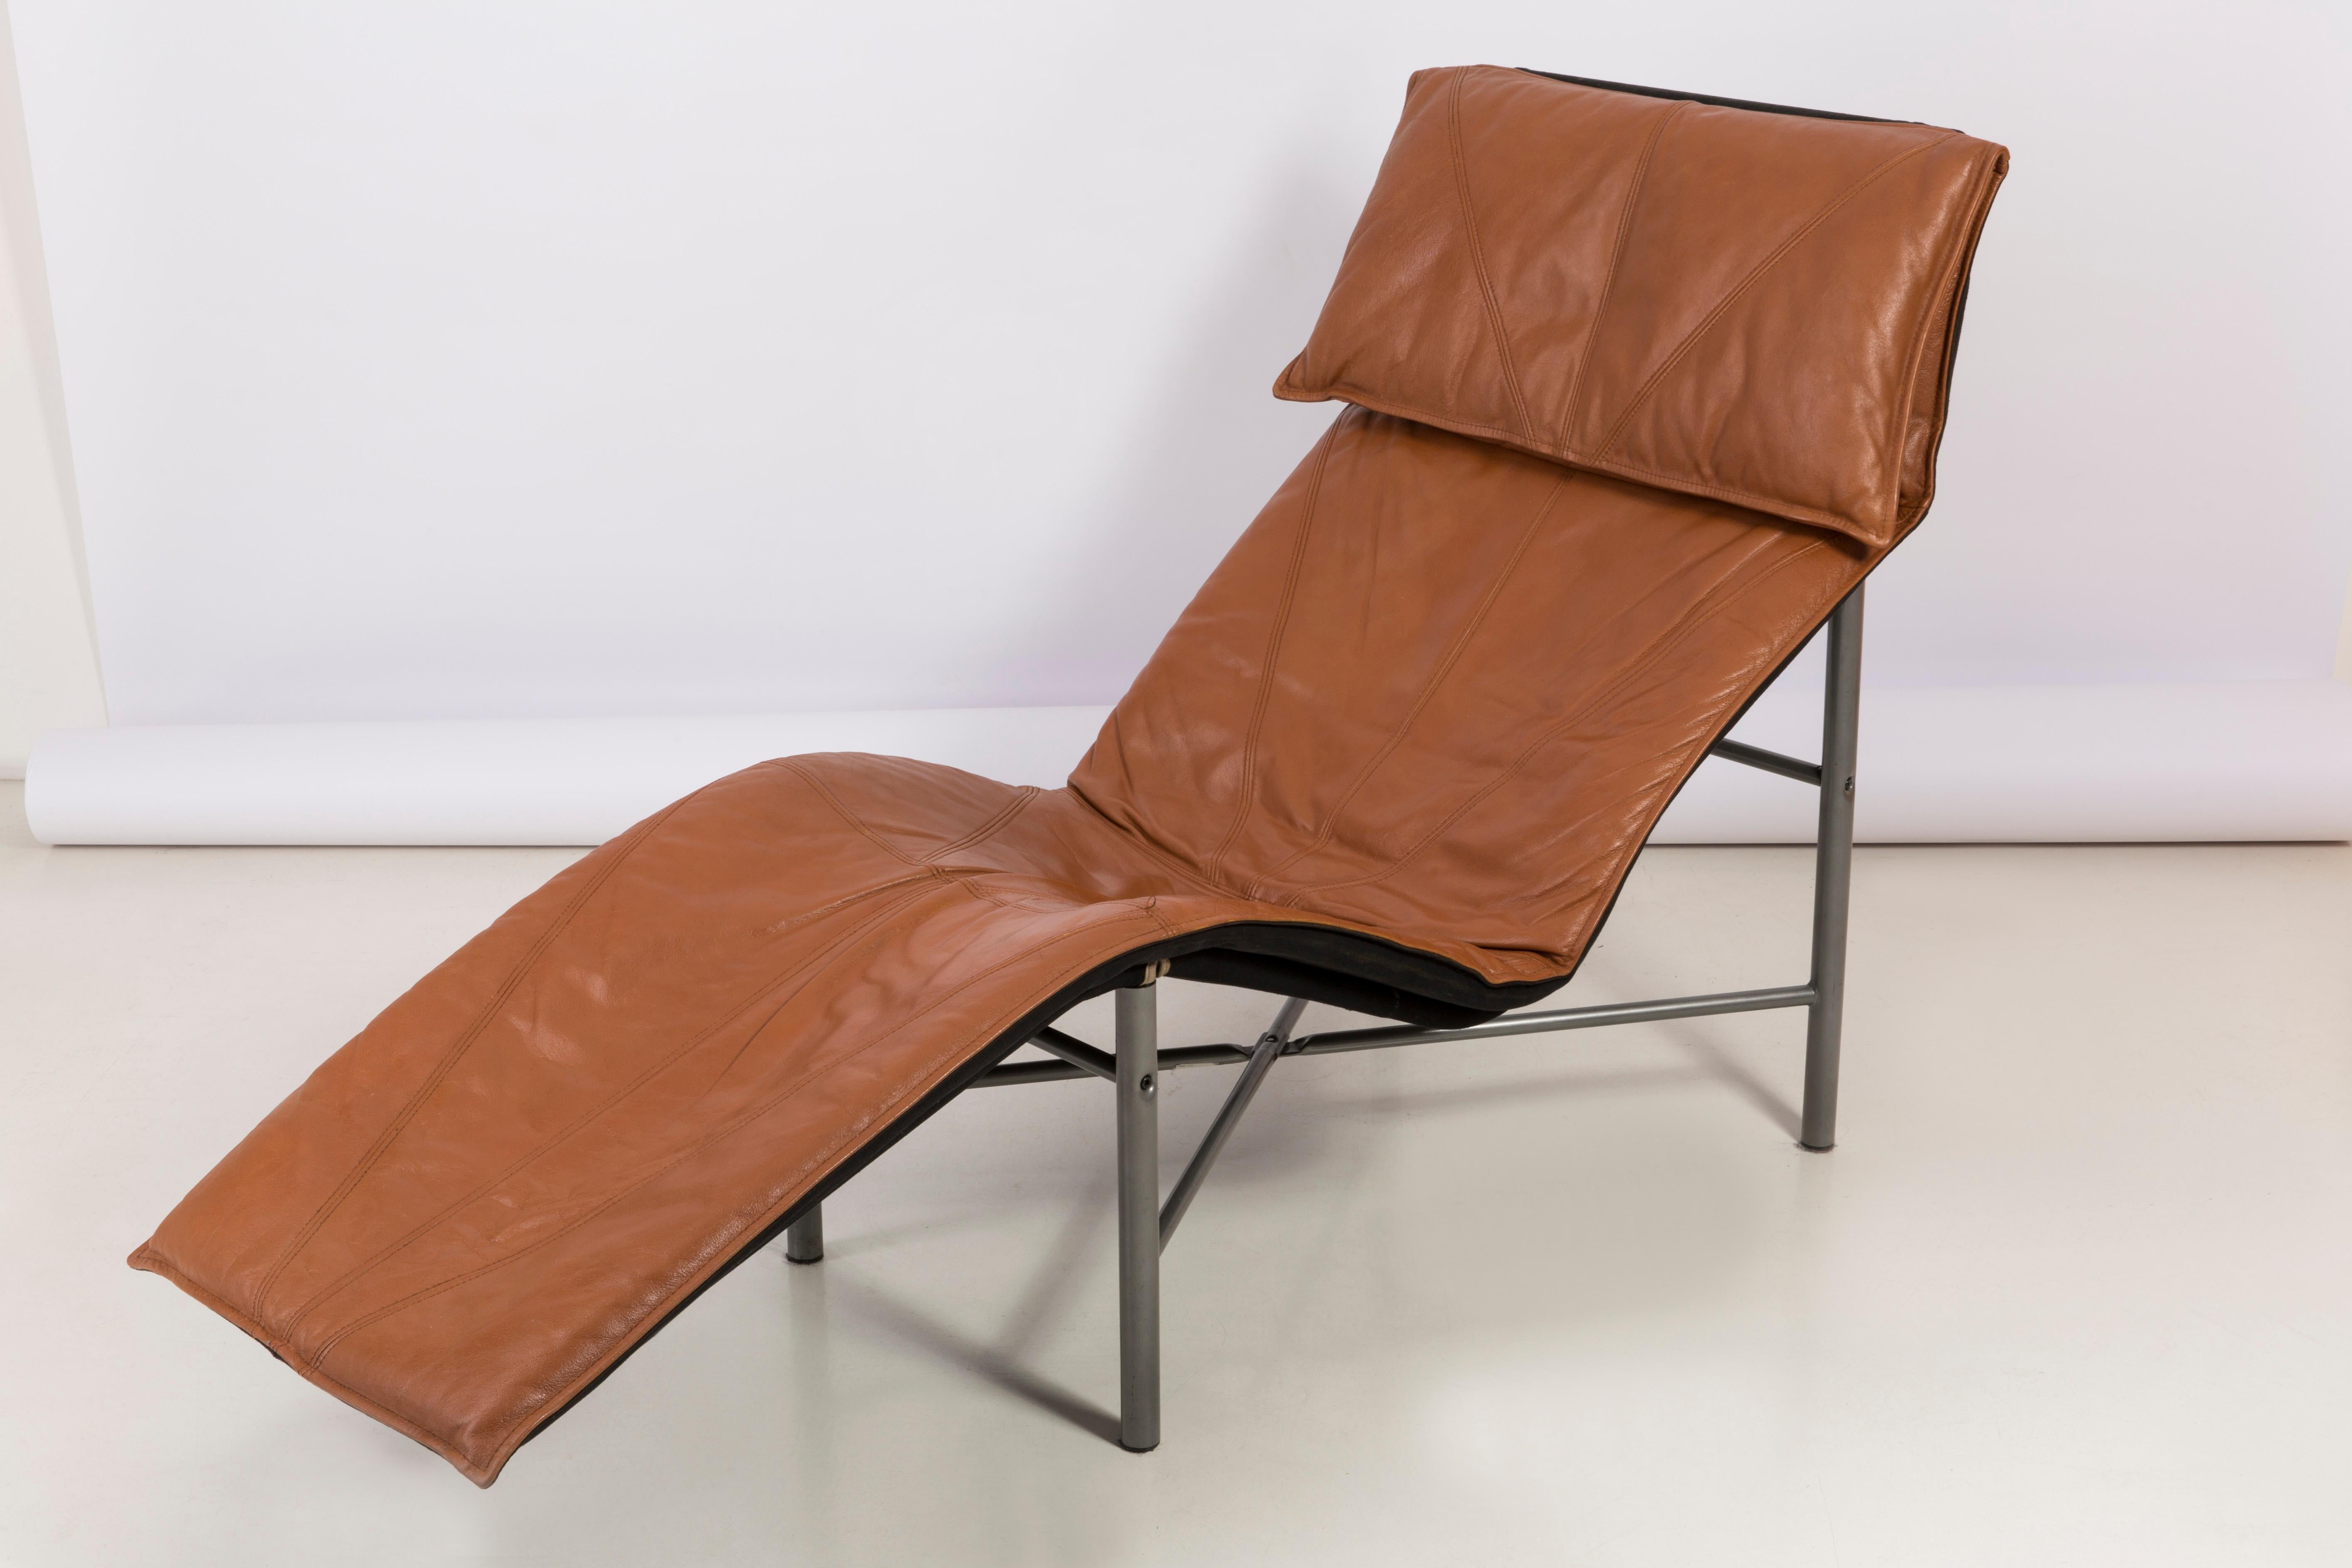 Two Midcentury Danish Modern Leather Chaise Lounge Chairs, Tord Björklund, 1980 For Sale 3